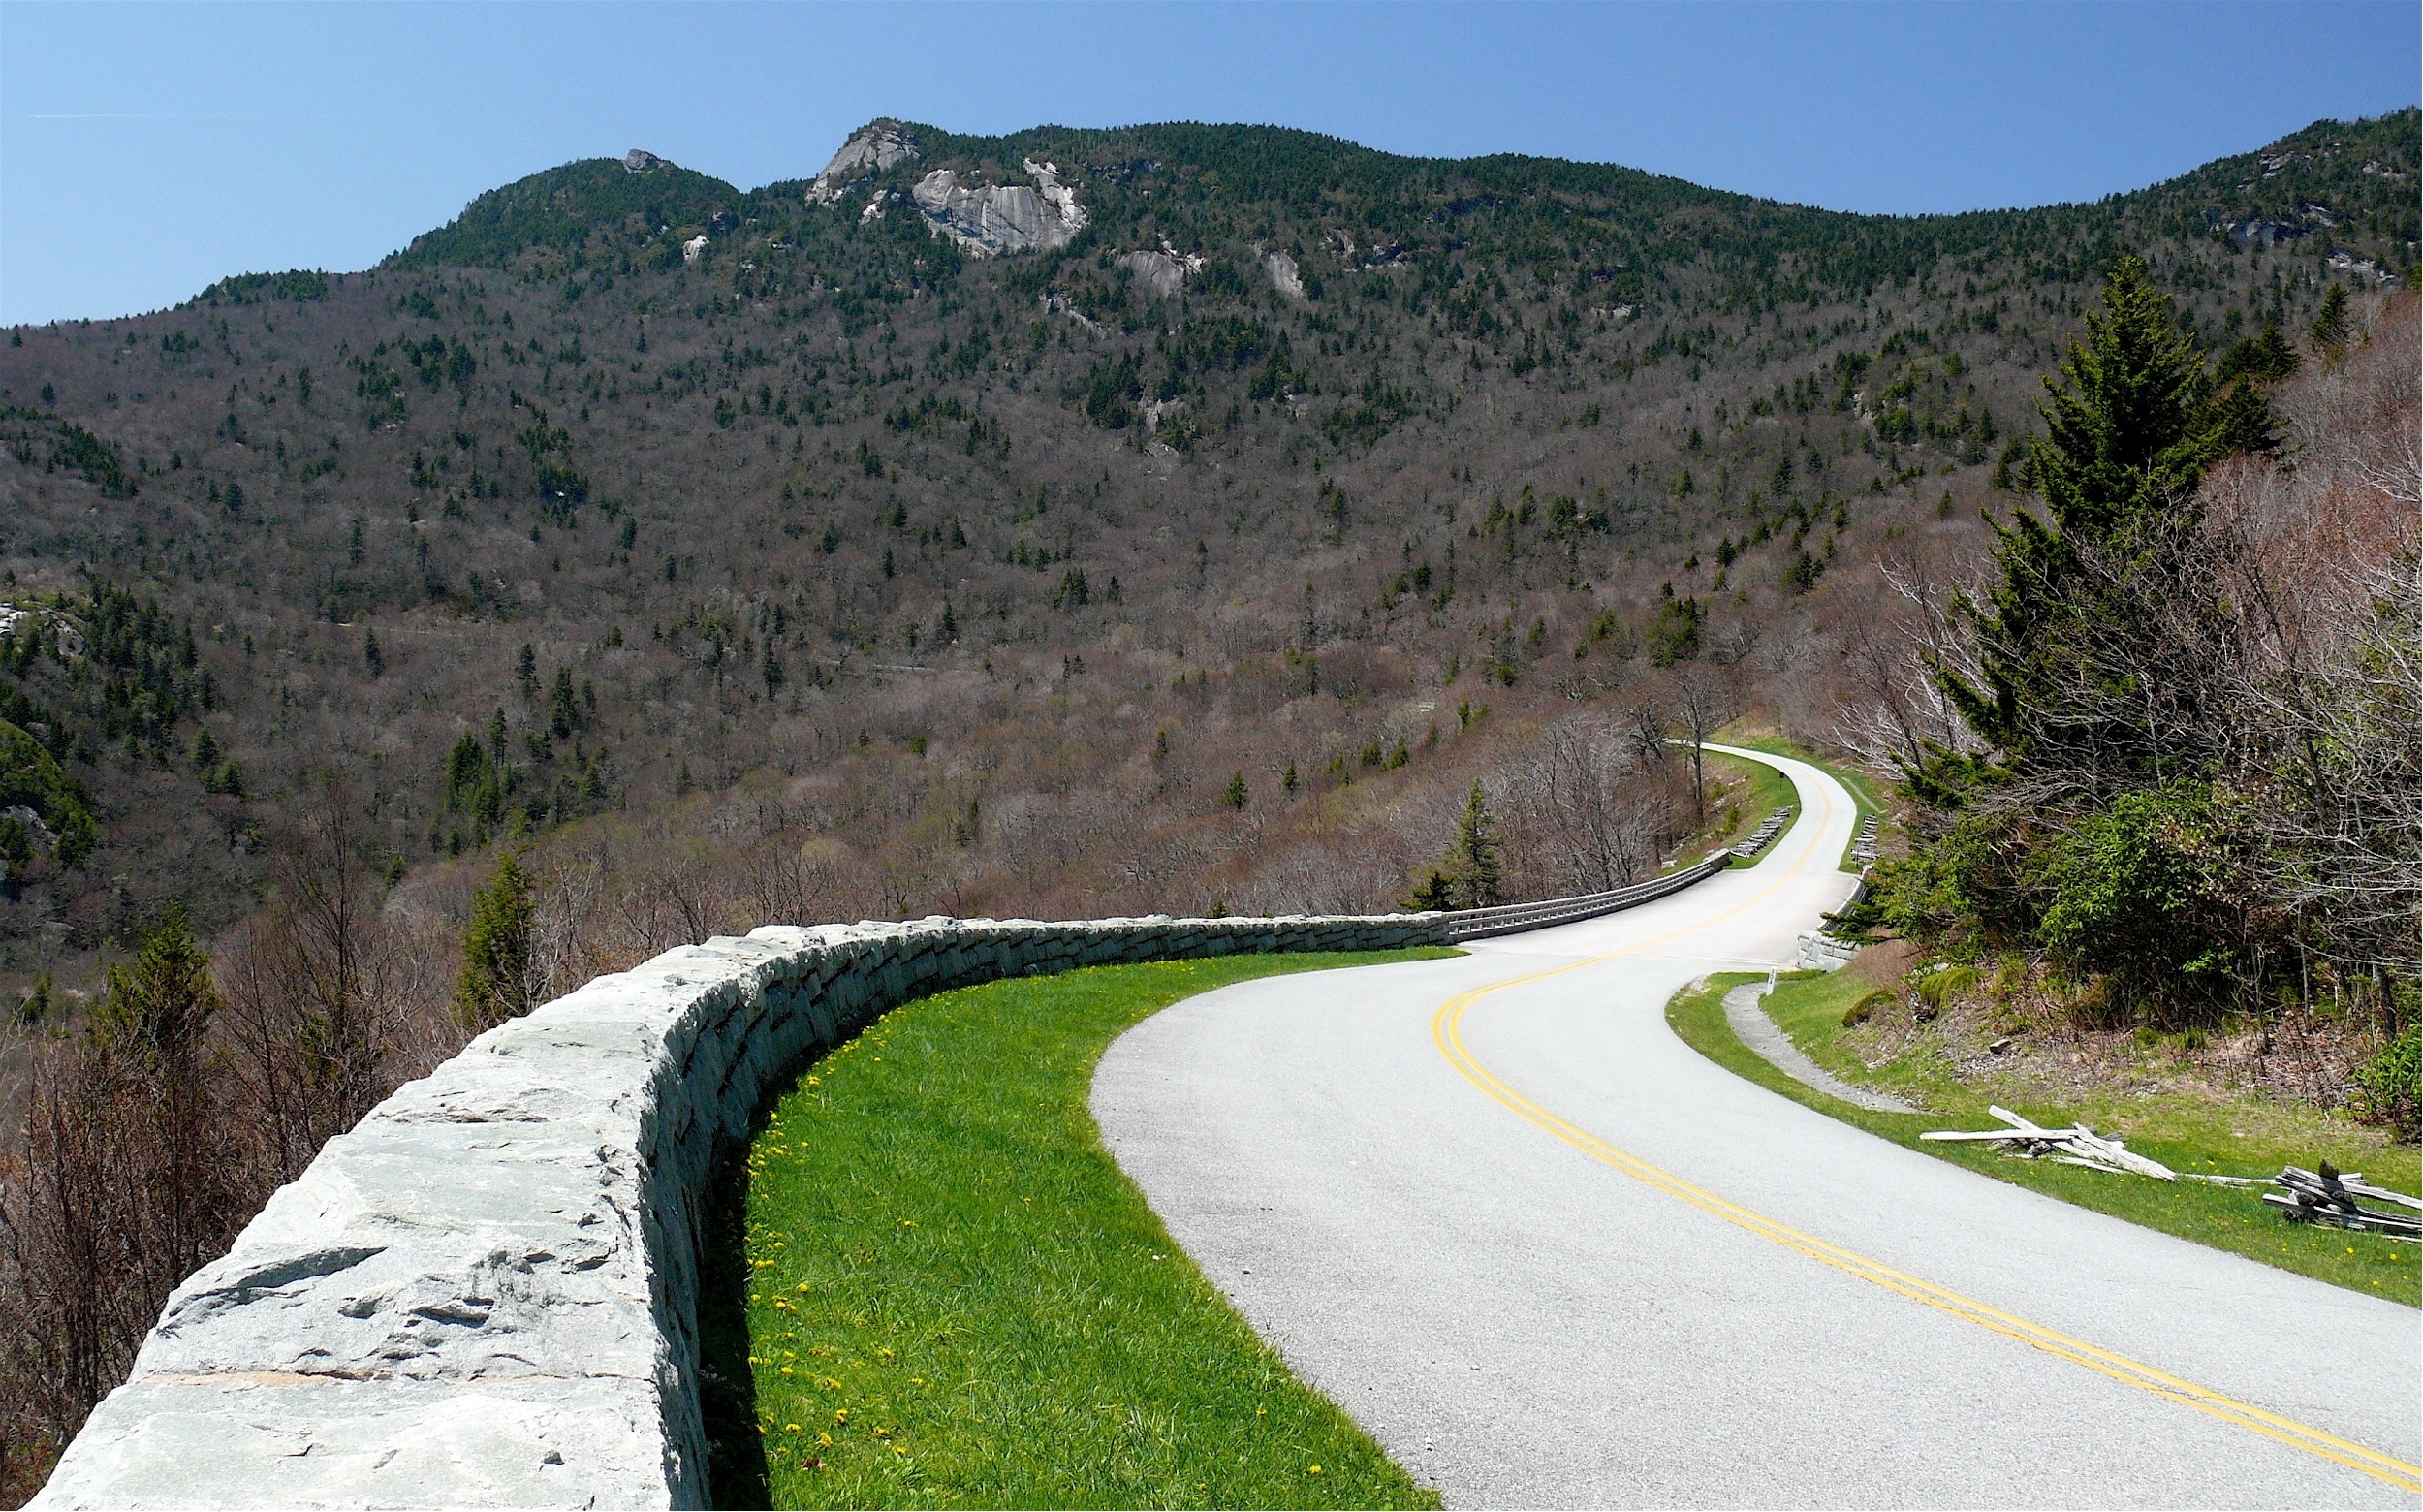 grey concrete road heading to mountain beside cliff with grey concrete barrier and trees under clear sky during daytime